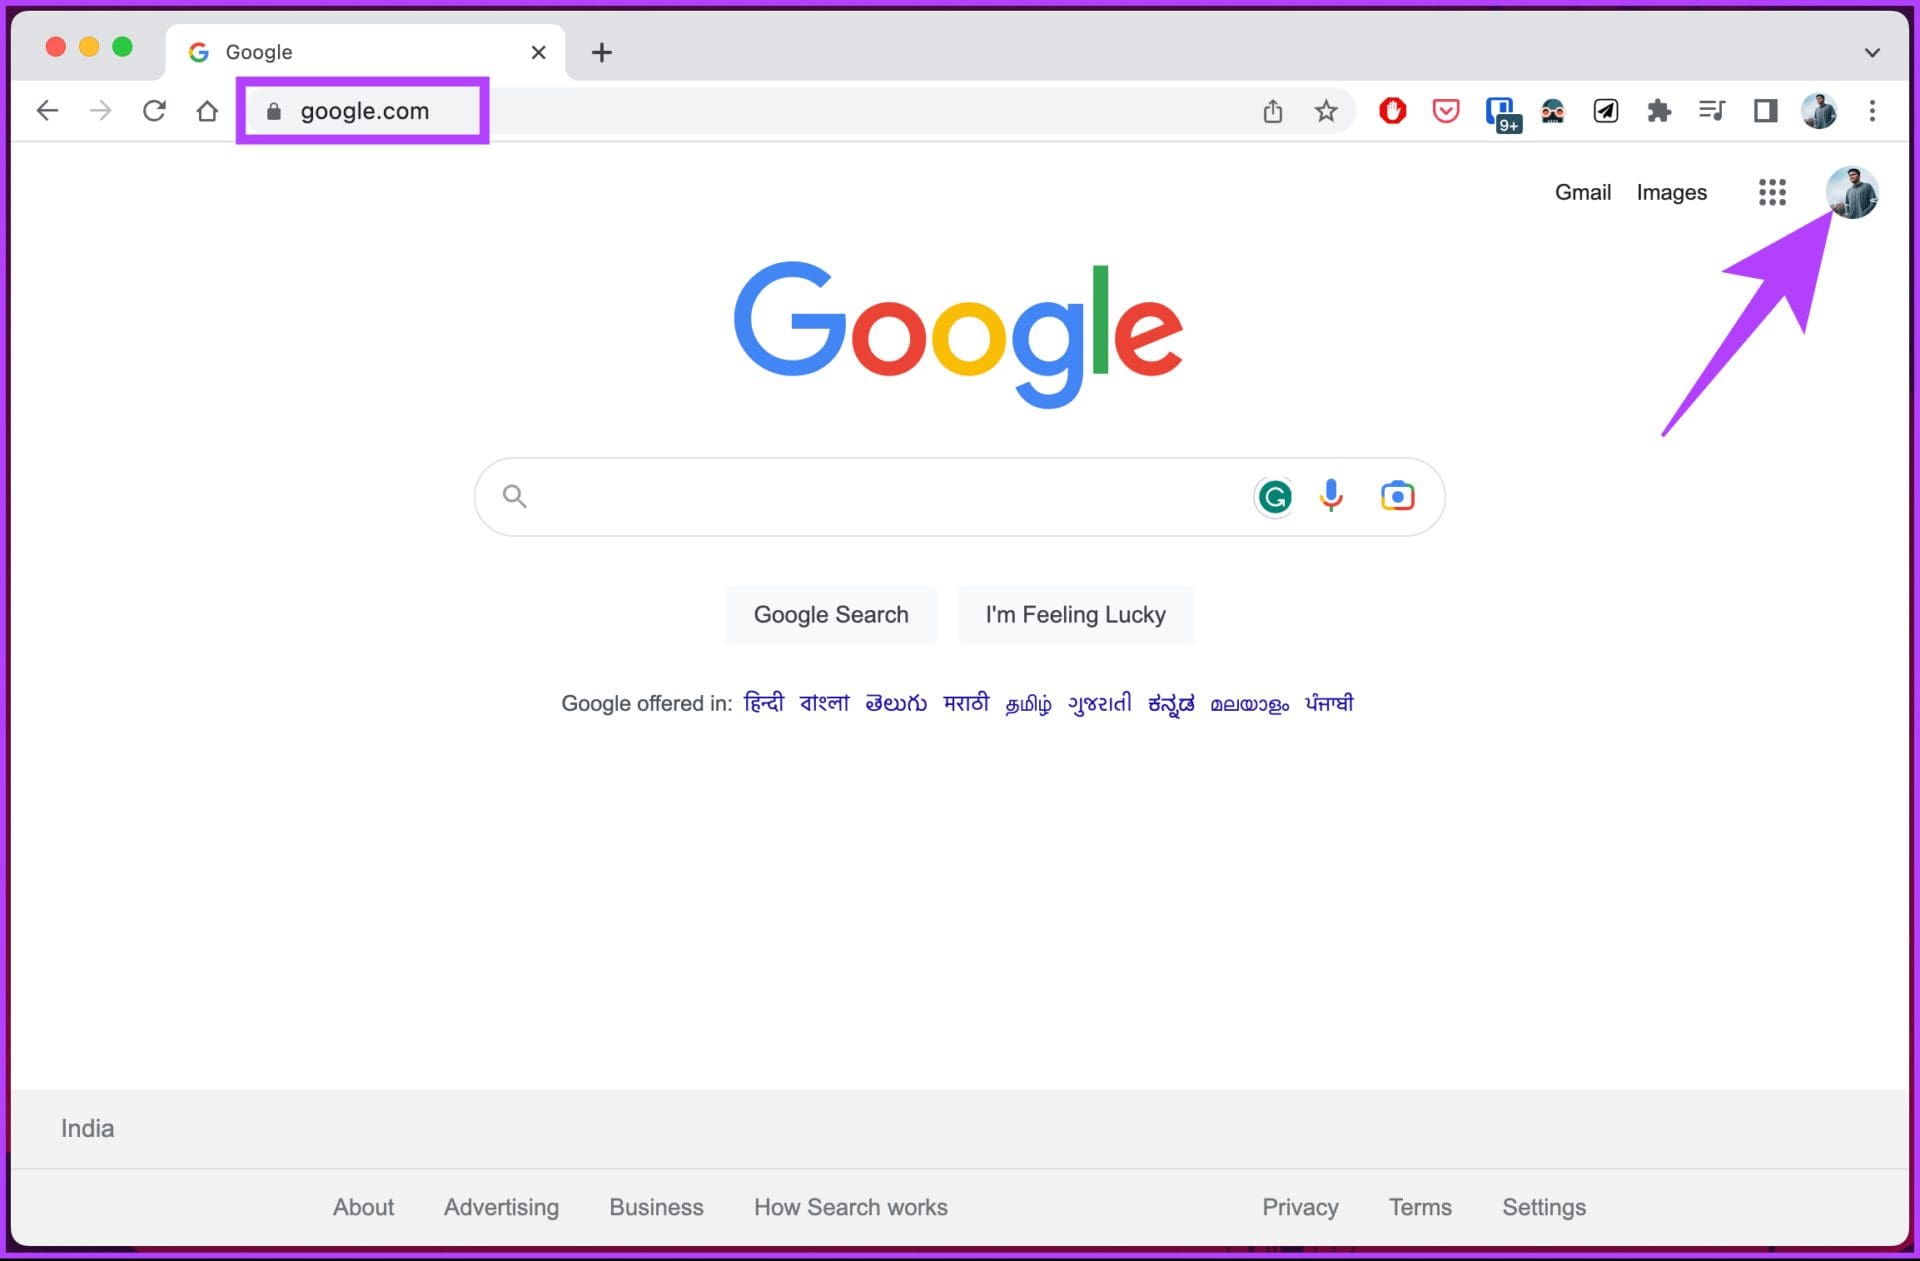 Go to Google from your preferred browser